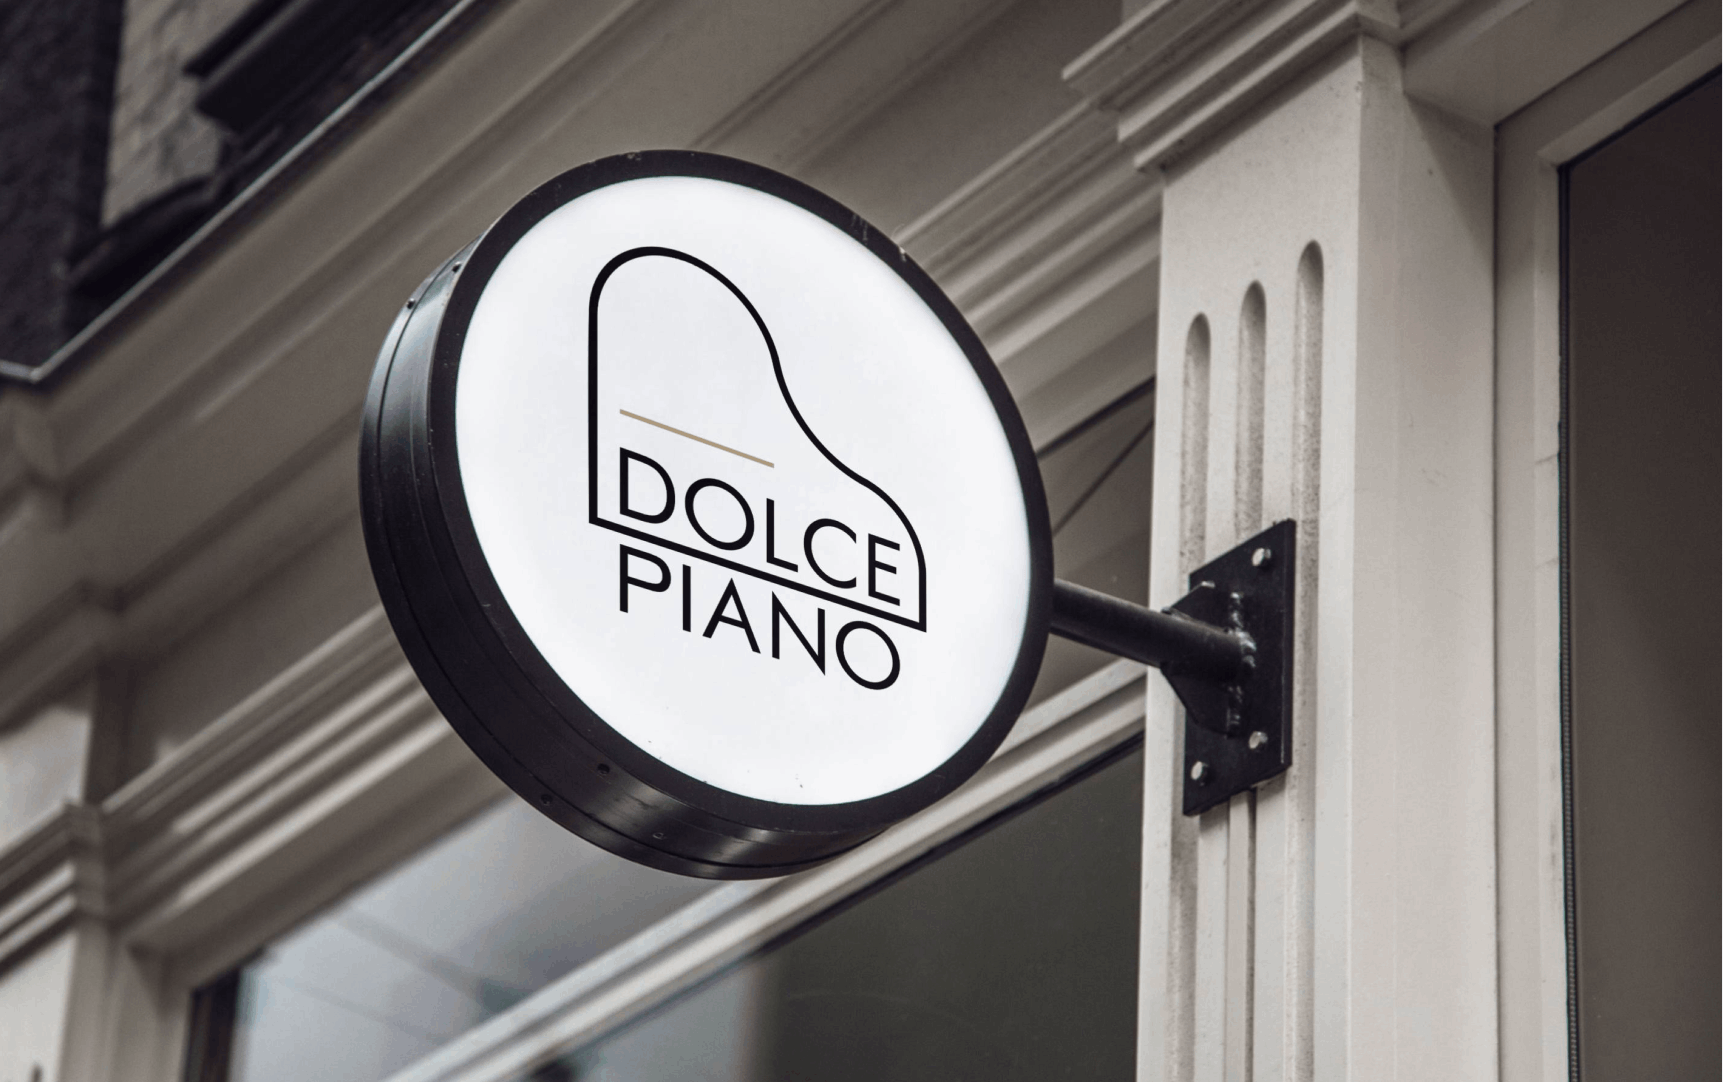 dolce piano los angeles site signers